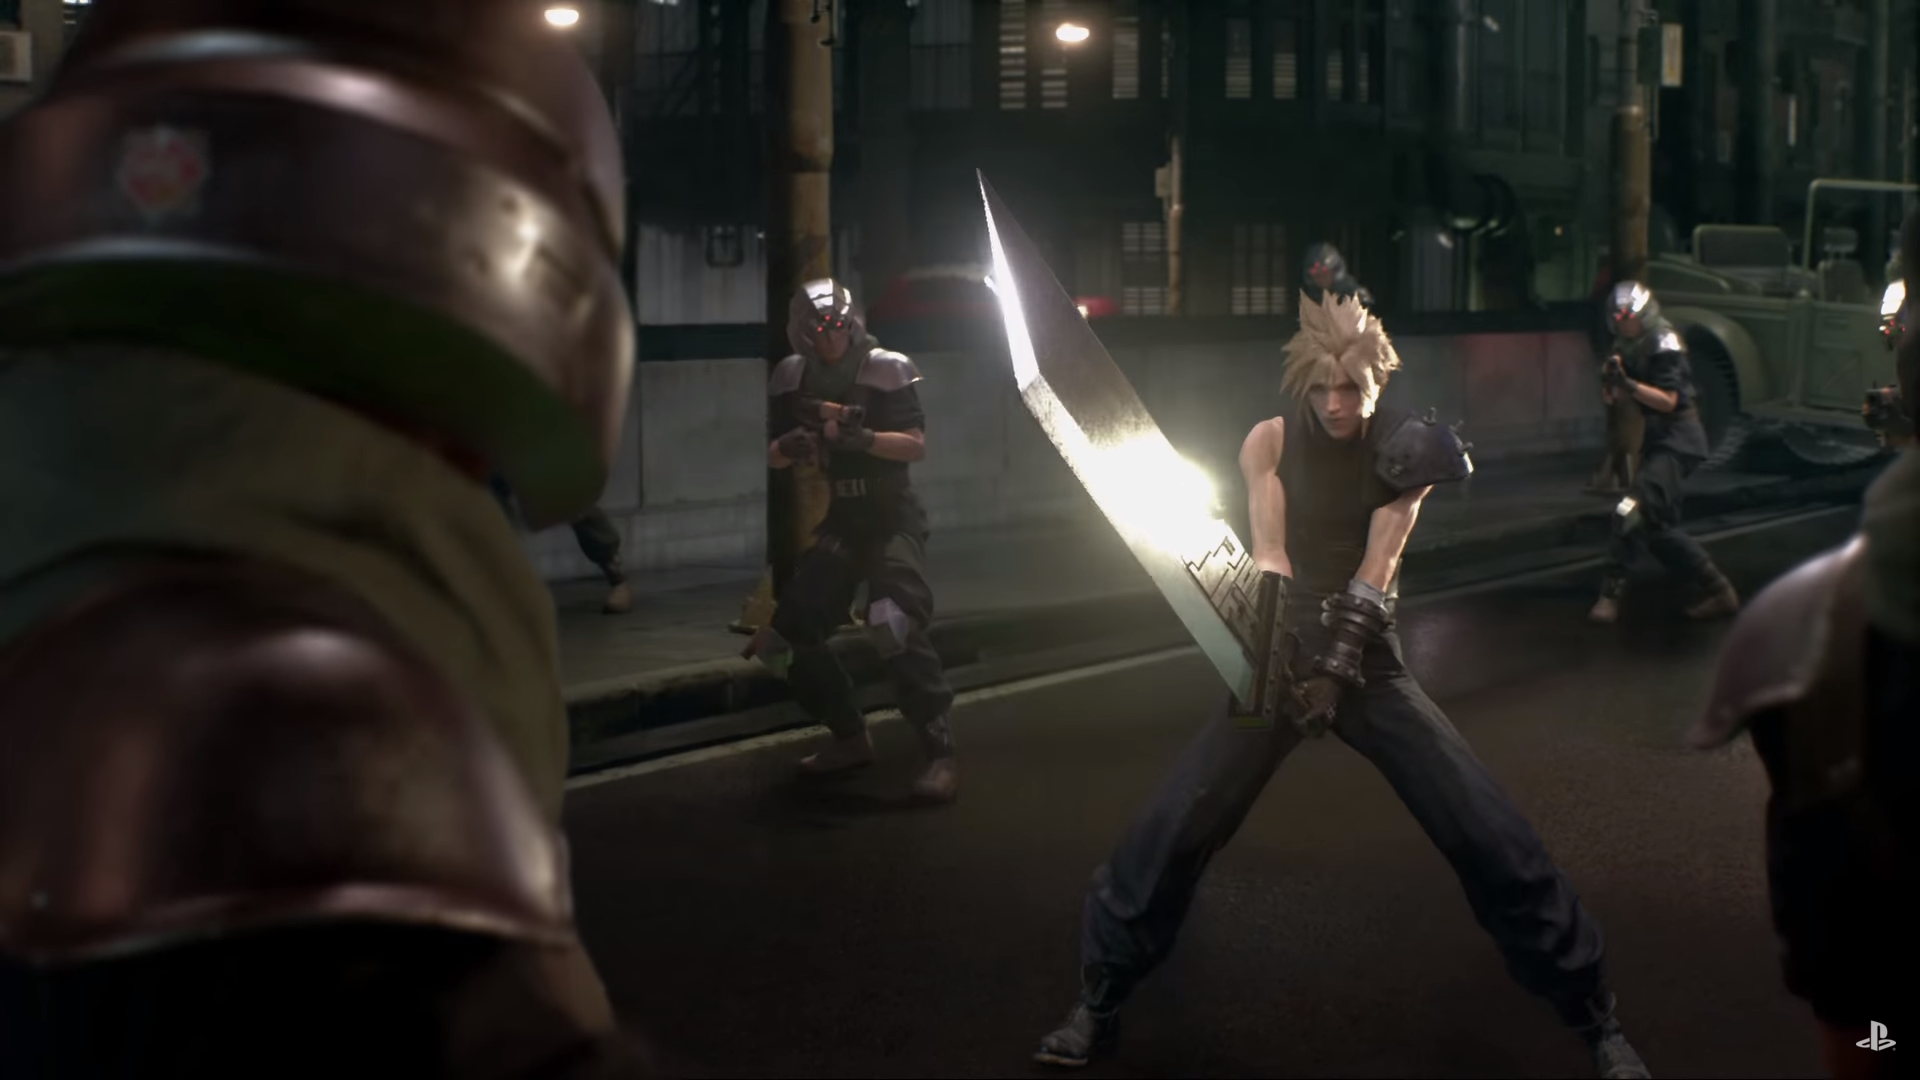 “FFVII Remake” Episodes Will Be Full-Game Sized - Game Set To Be Huge